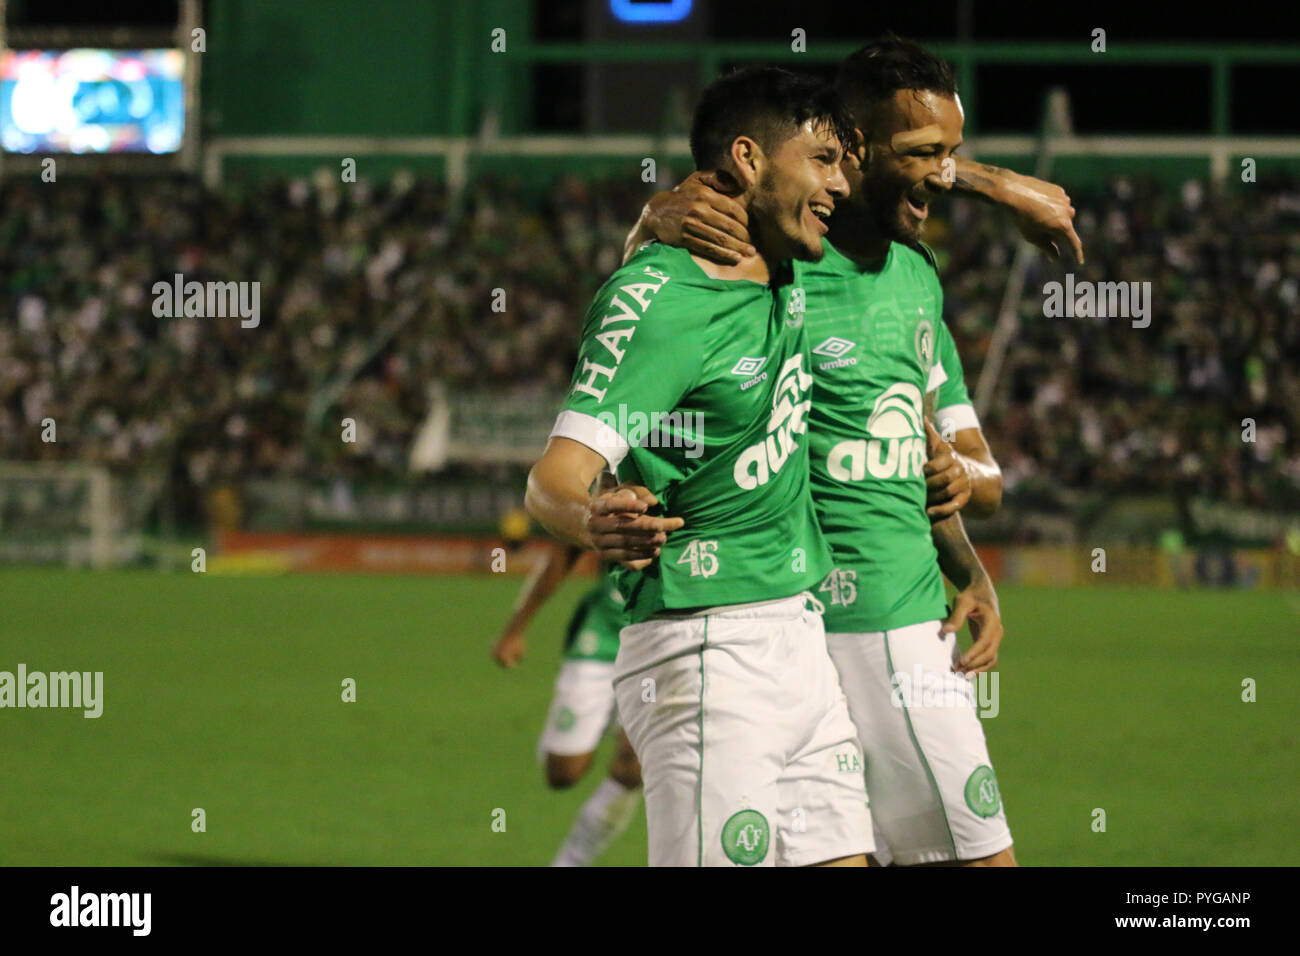 SC Chapecoense celebrates his goal in which he scored a touch on the Moeno Valeu during a match against America-MG in Arena Arena Conda for the Brazilian championship. A 2018. Photo: Renato Padilha / AGIF Stock Photo